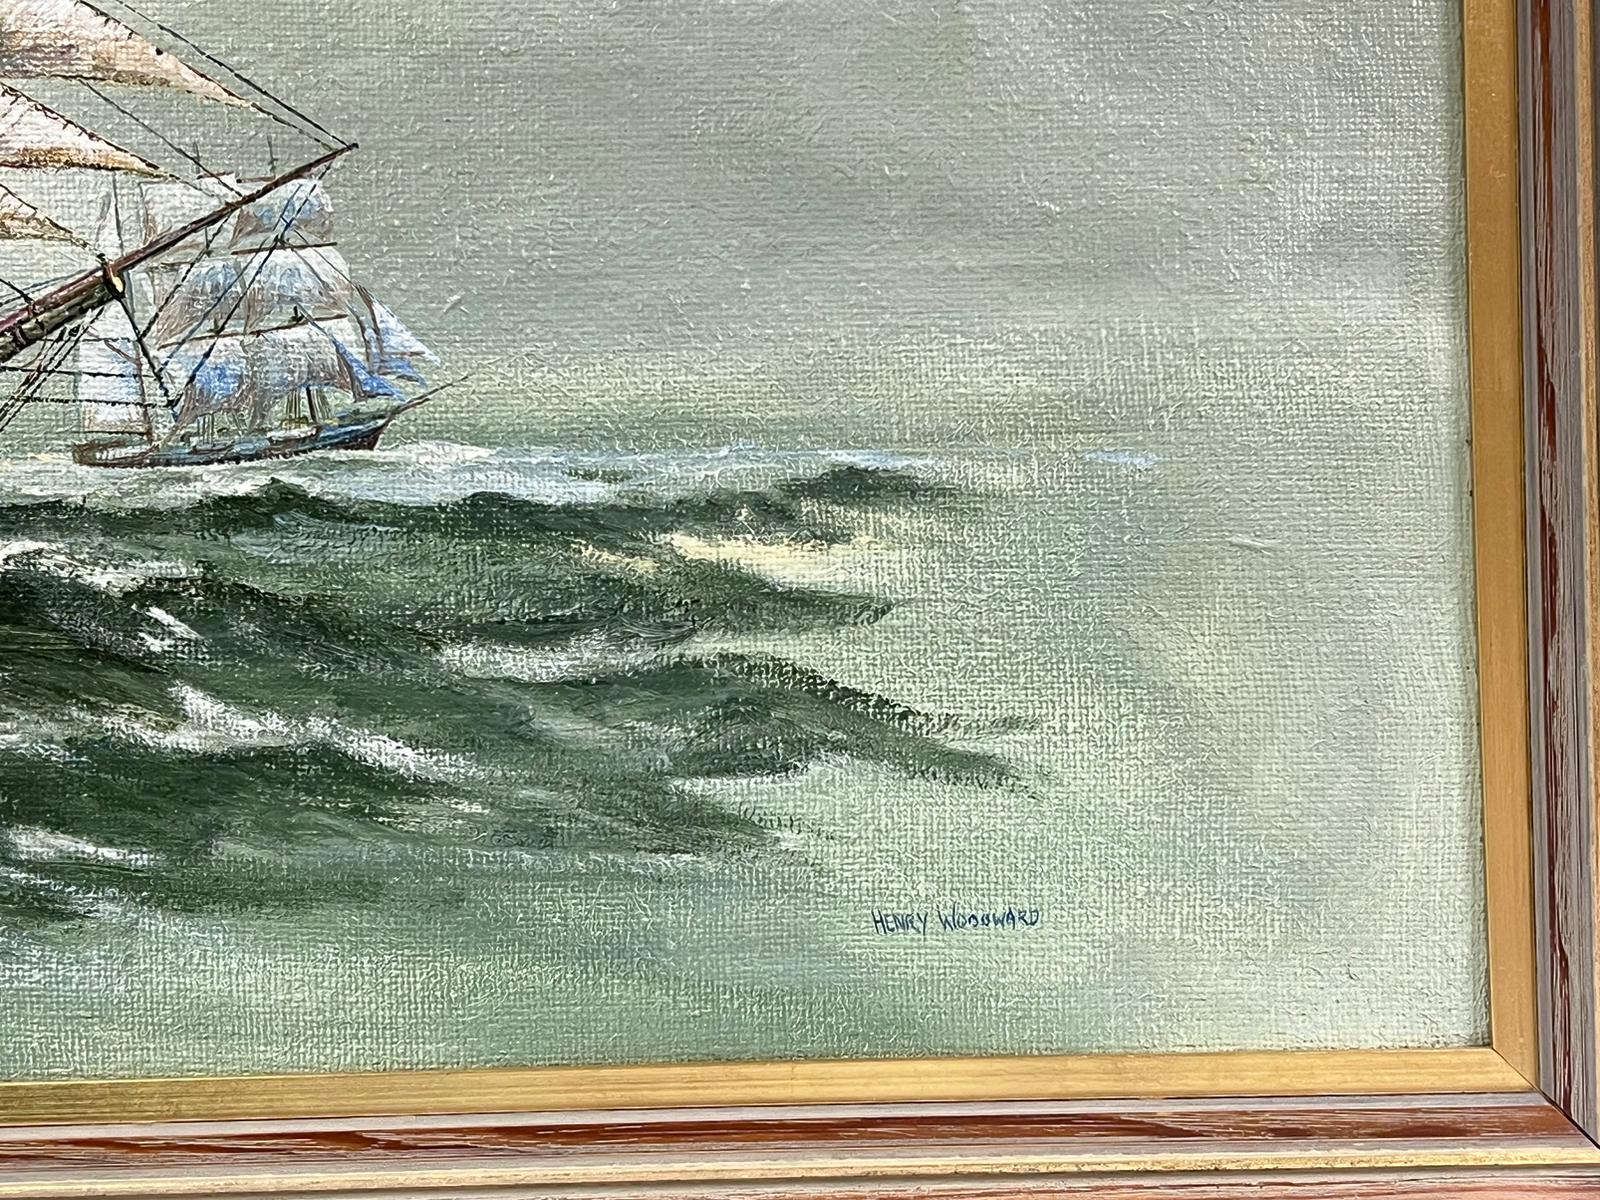 Large British Marine Oil Painting Old Whaling Ships on High Seas, signed canvas For Sale 1